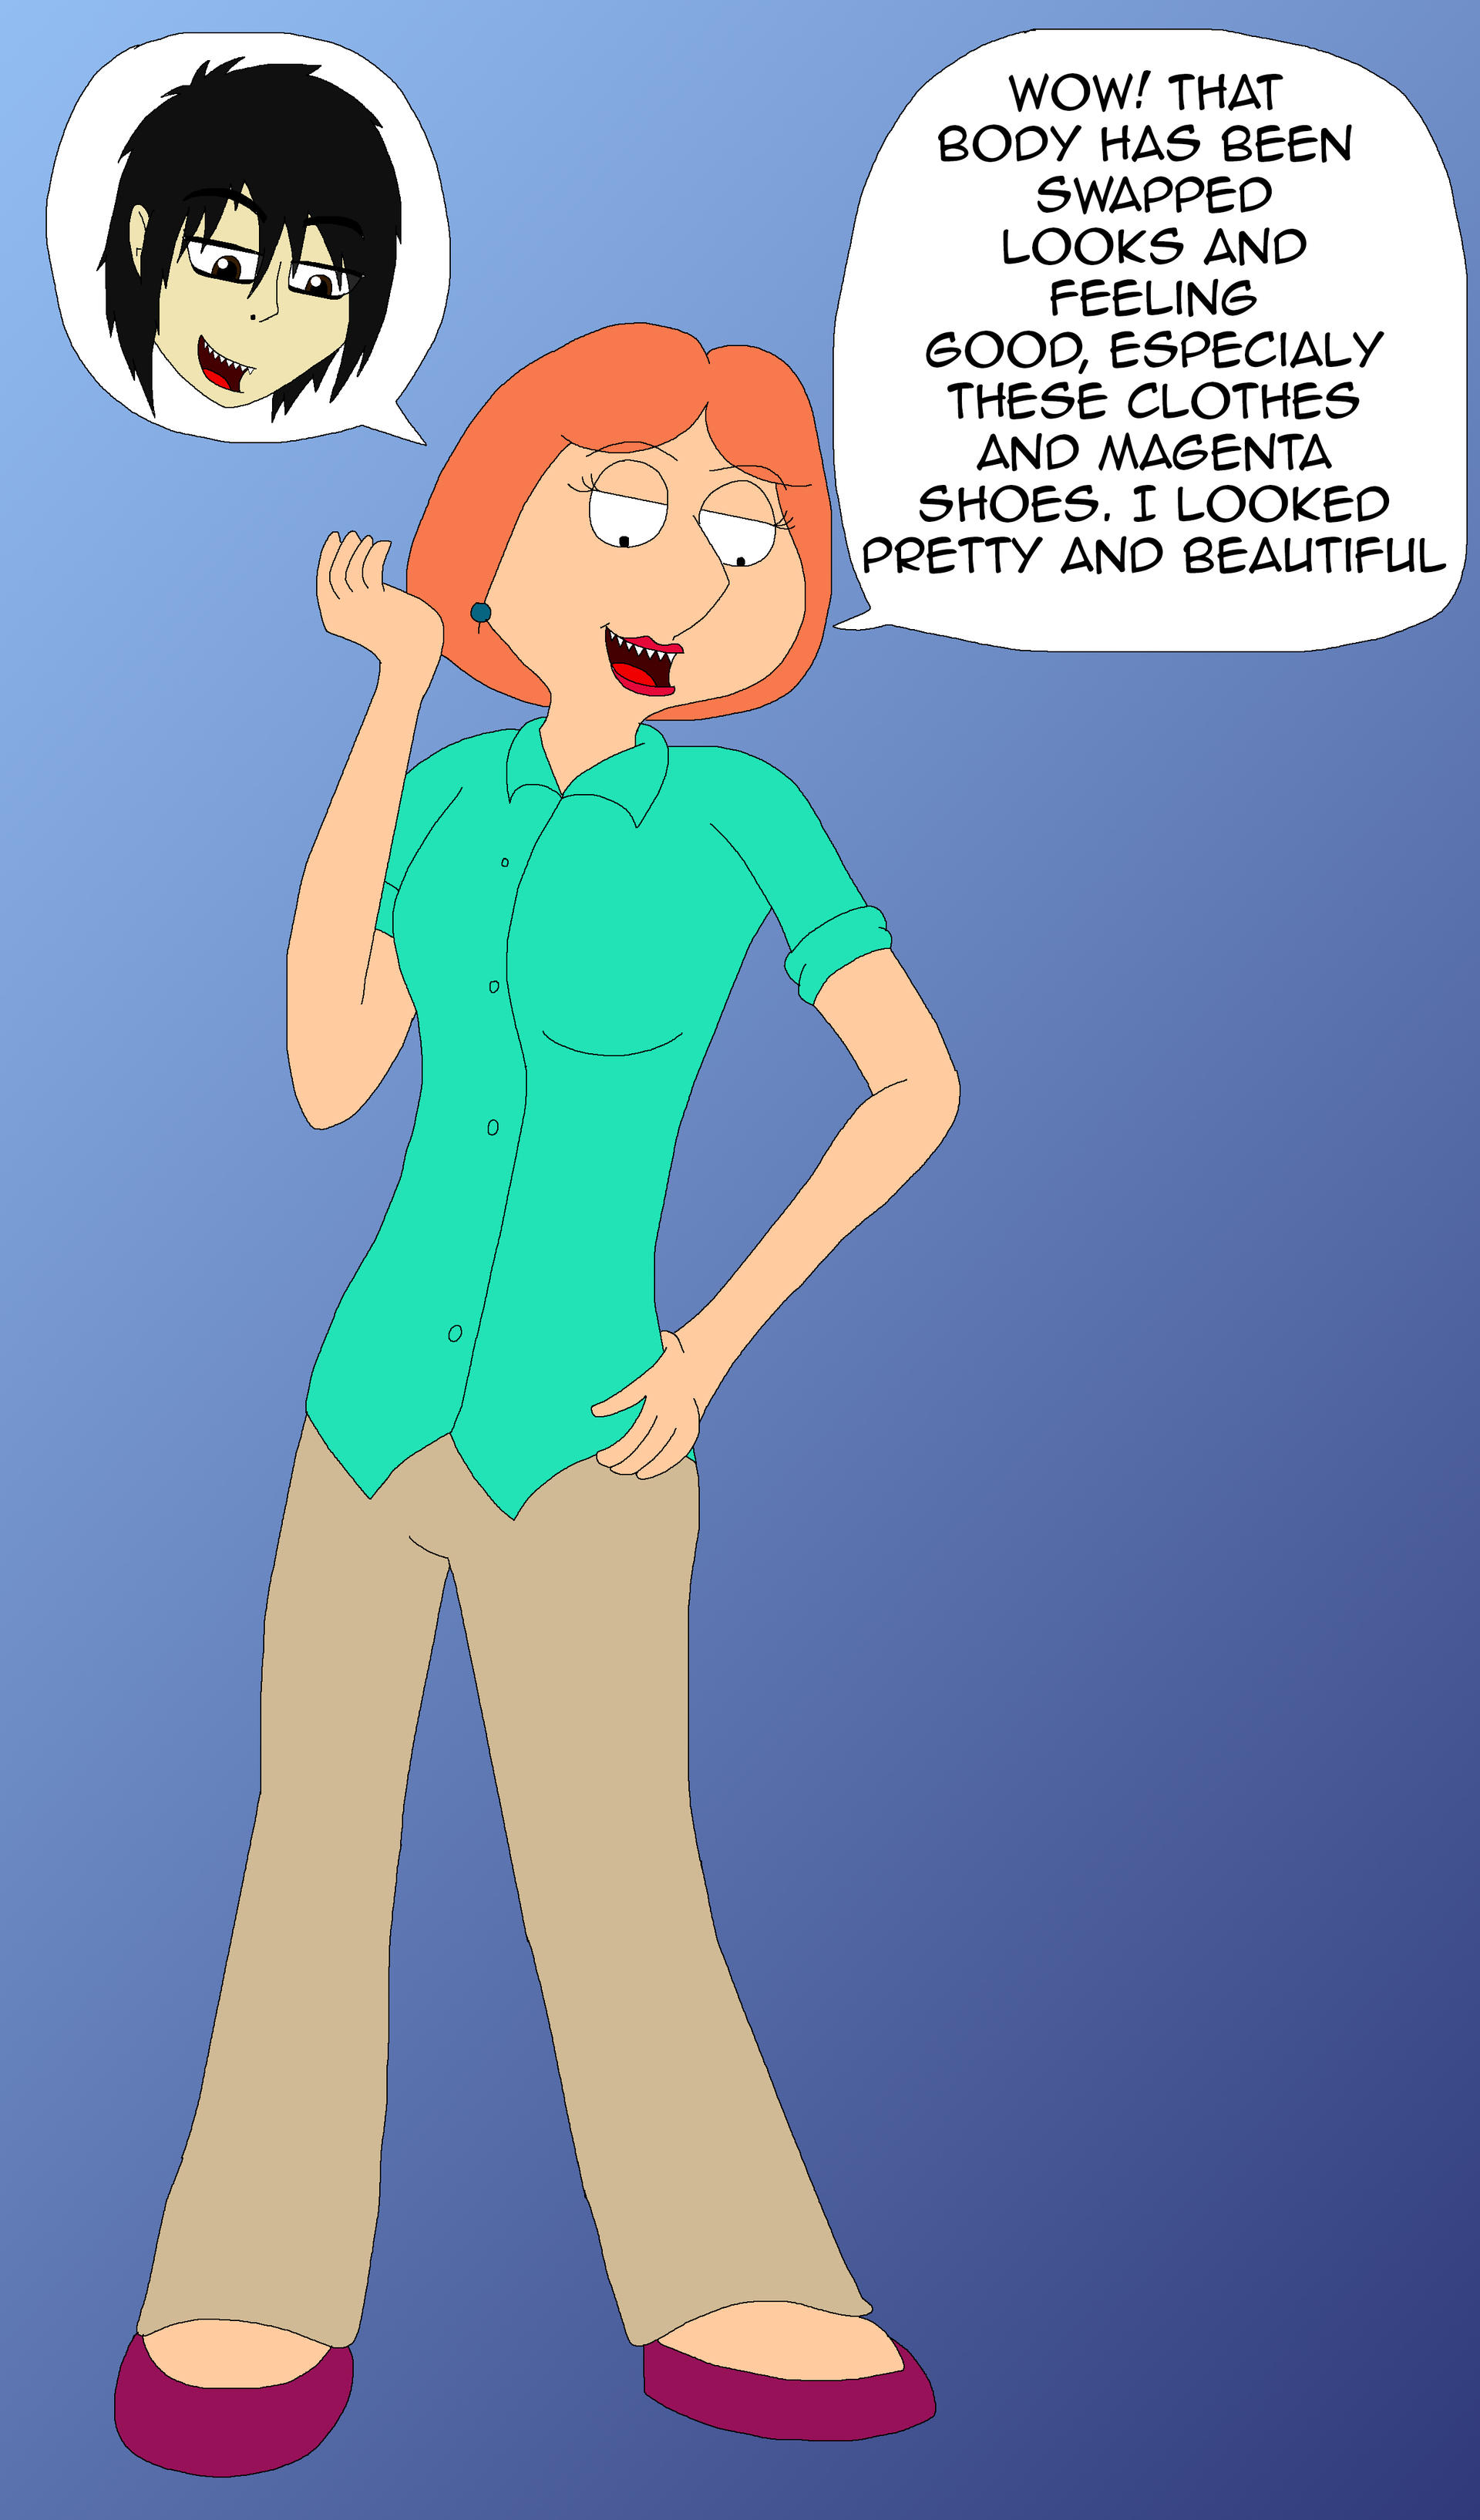 Body swapped lois griffin by hirohamadarockz on